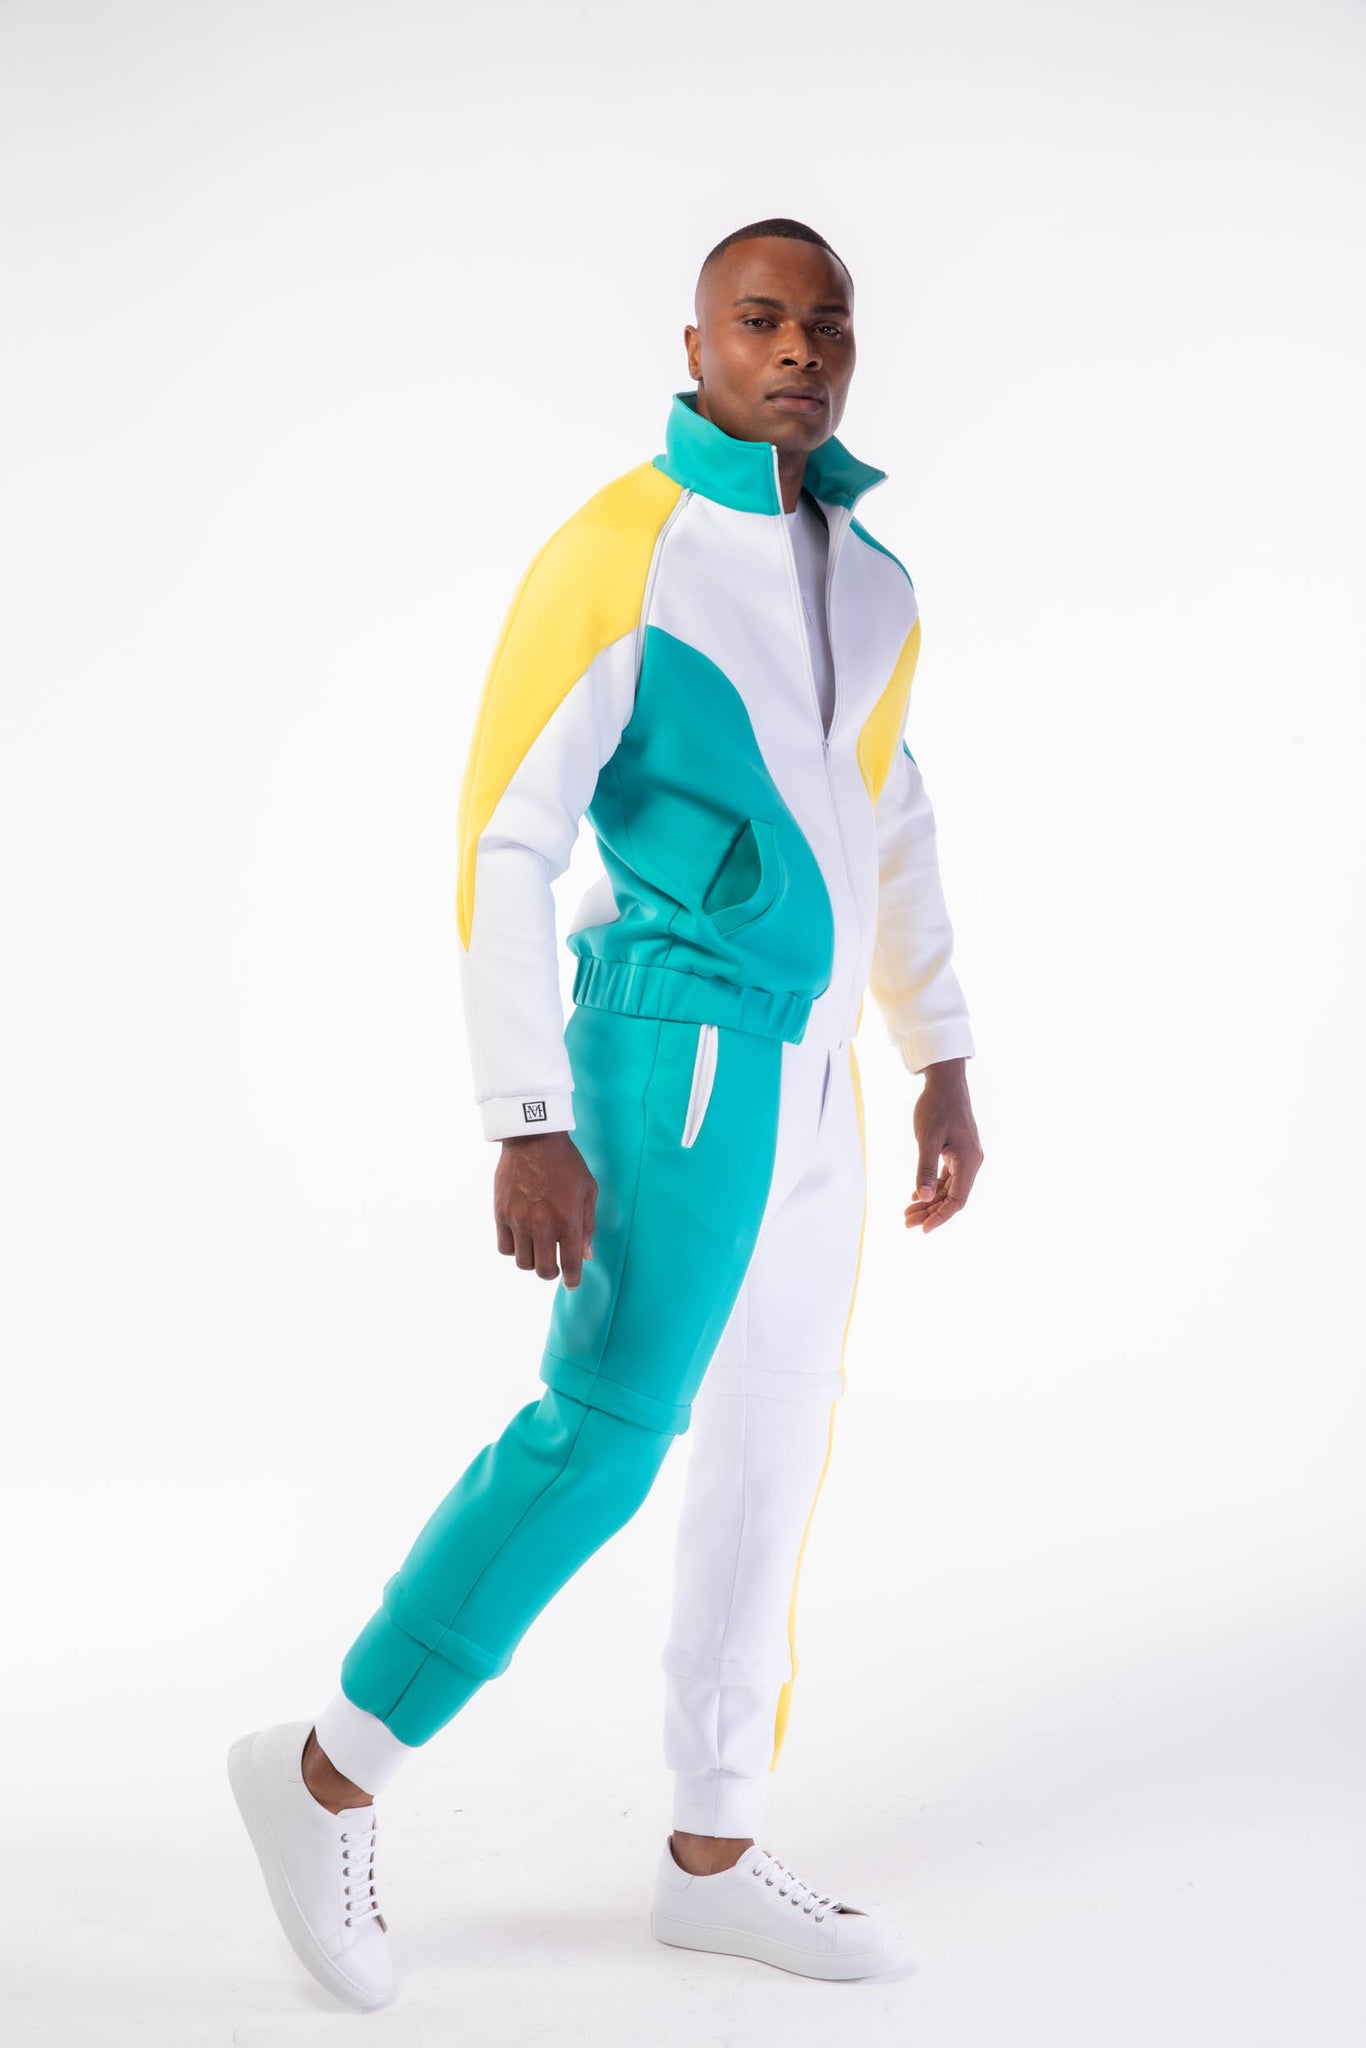 DM 500 F.I.T.S  TRACKSUIT TEAL,YELLOW, WHITE